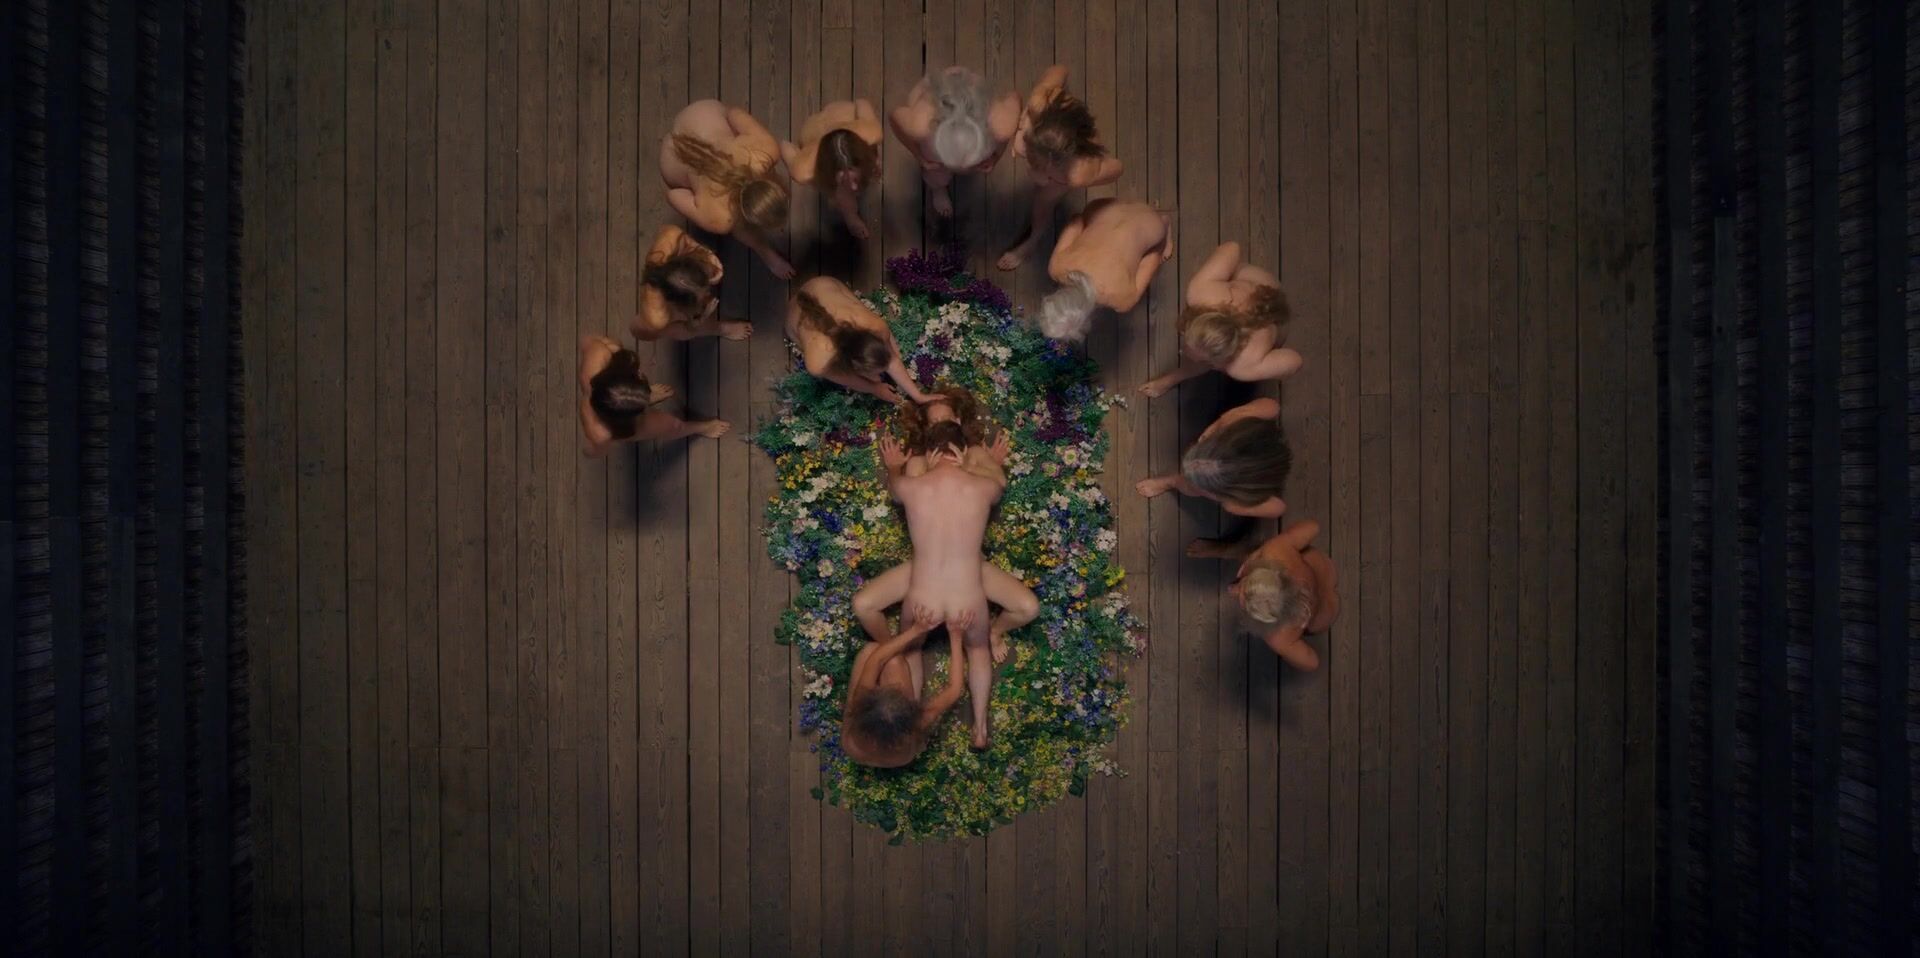 Music Nude Isabelle Grill sex scene from Midsommar (2019) Erotica